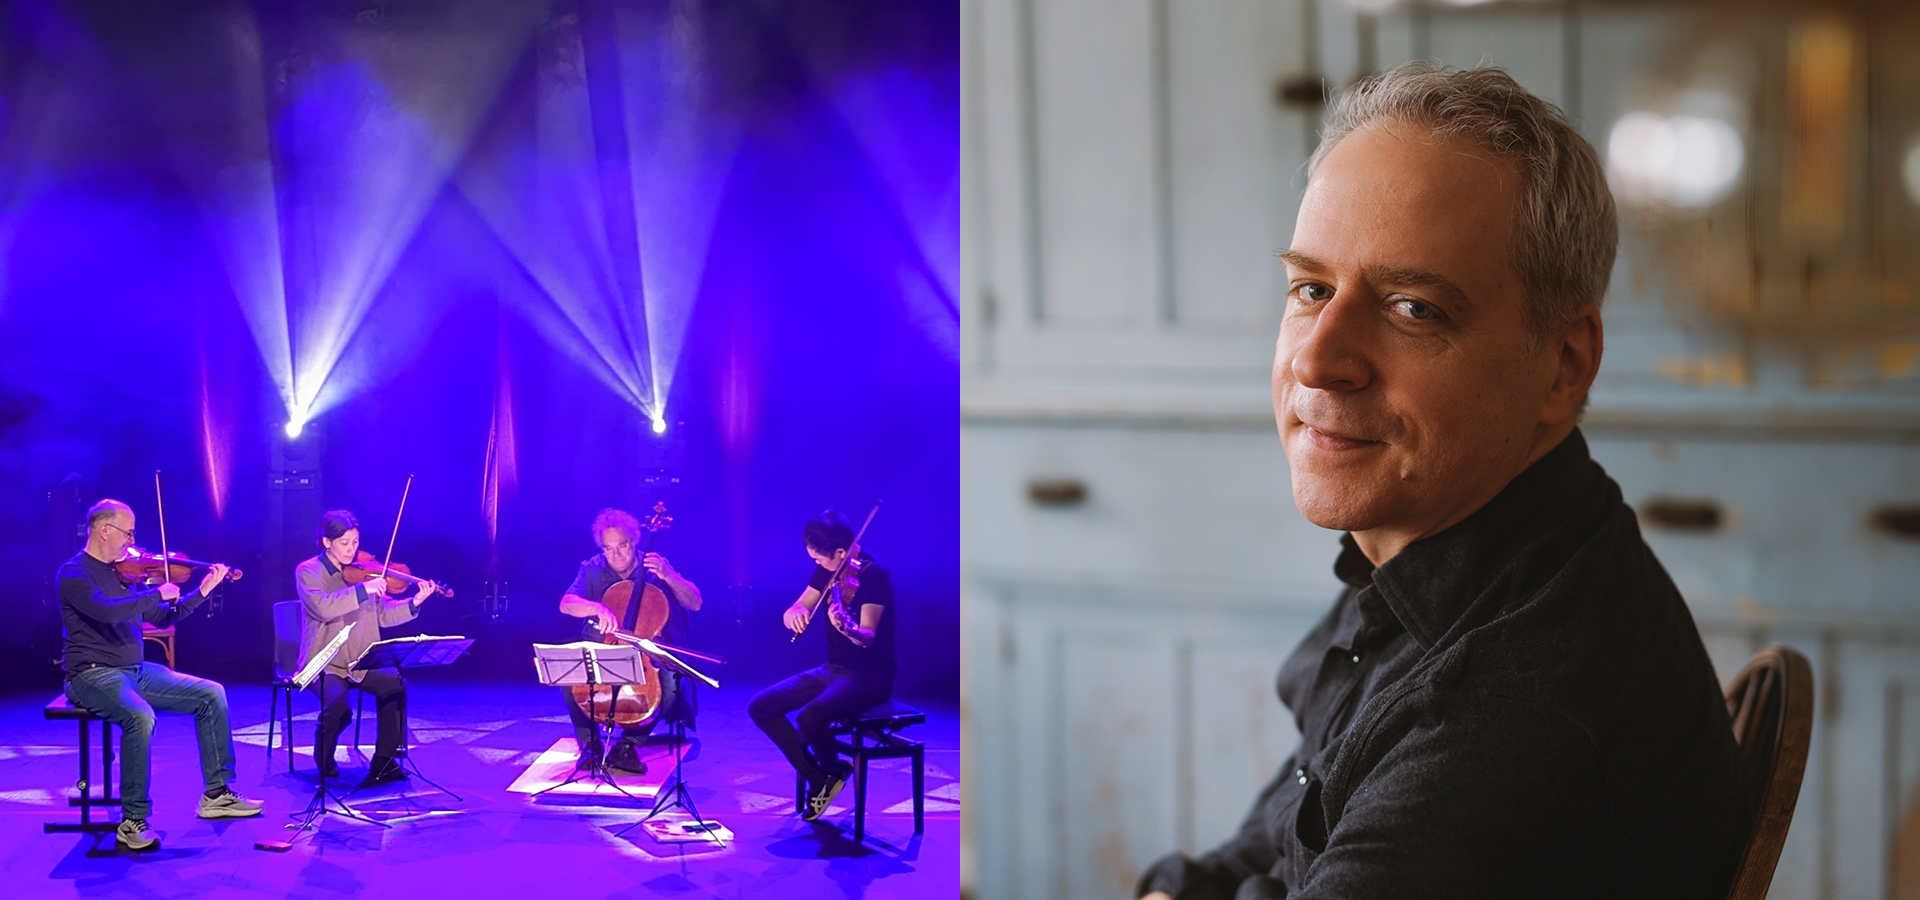 A collage image of the Takacs Quartet performing on a stage illuminated by purple lights on the left side, and a close up of pianist Jeremy Denk on the right side.